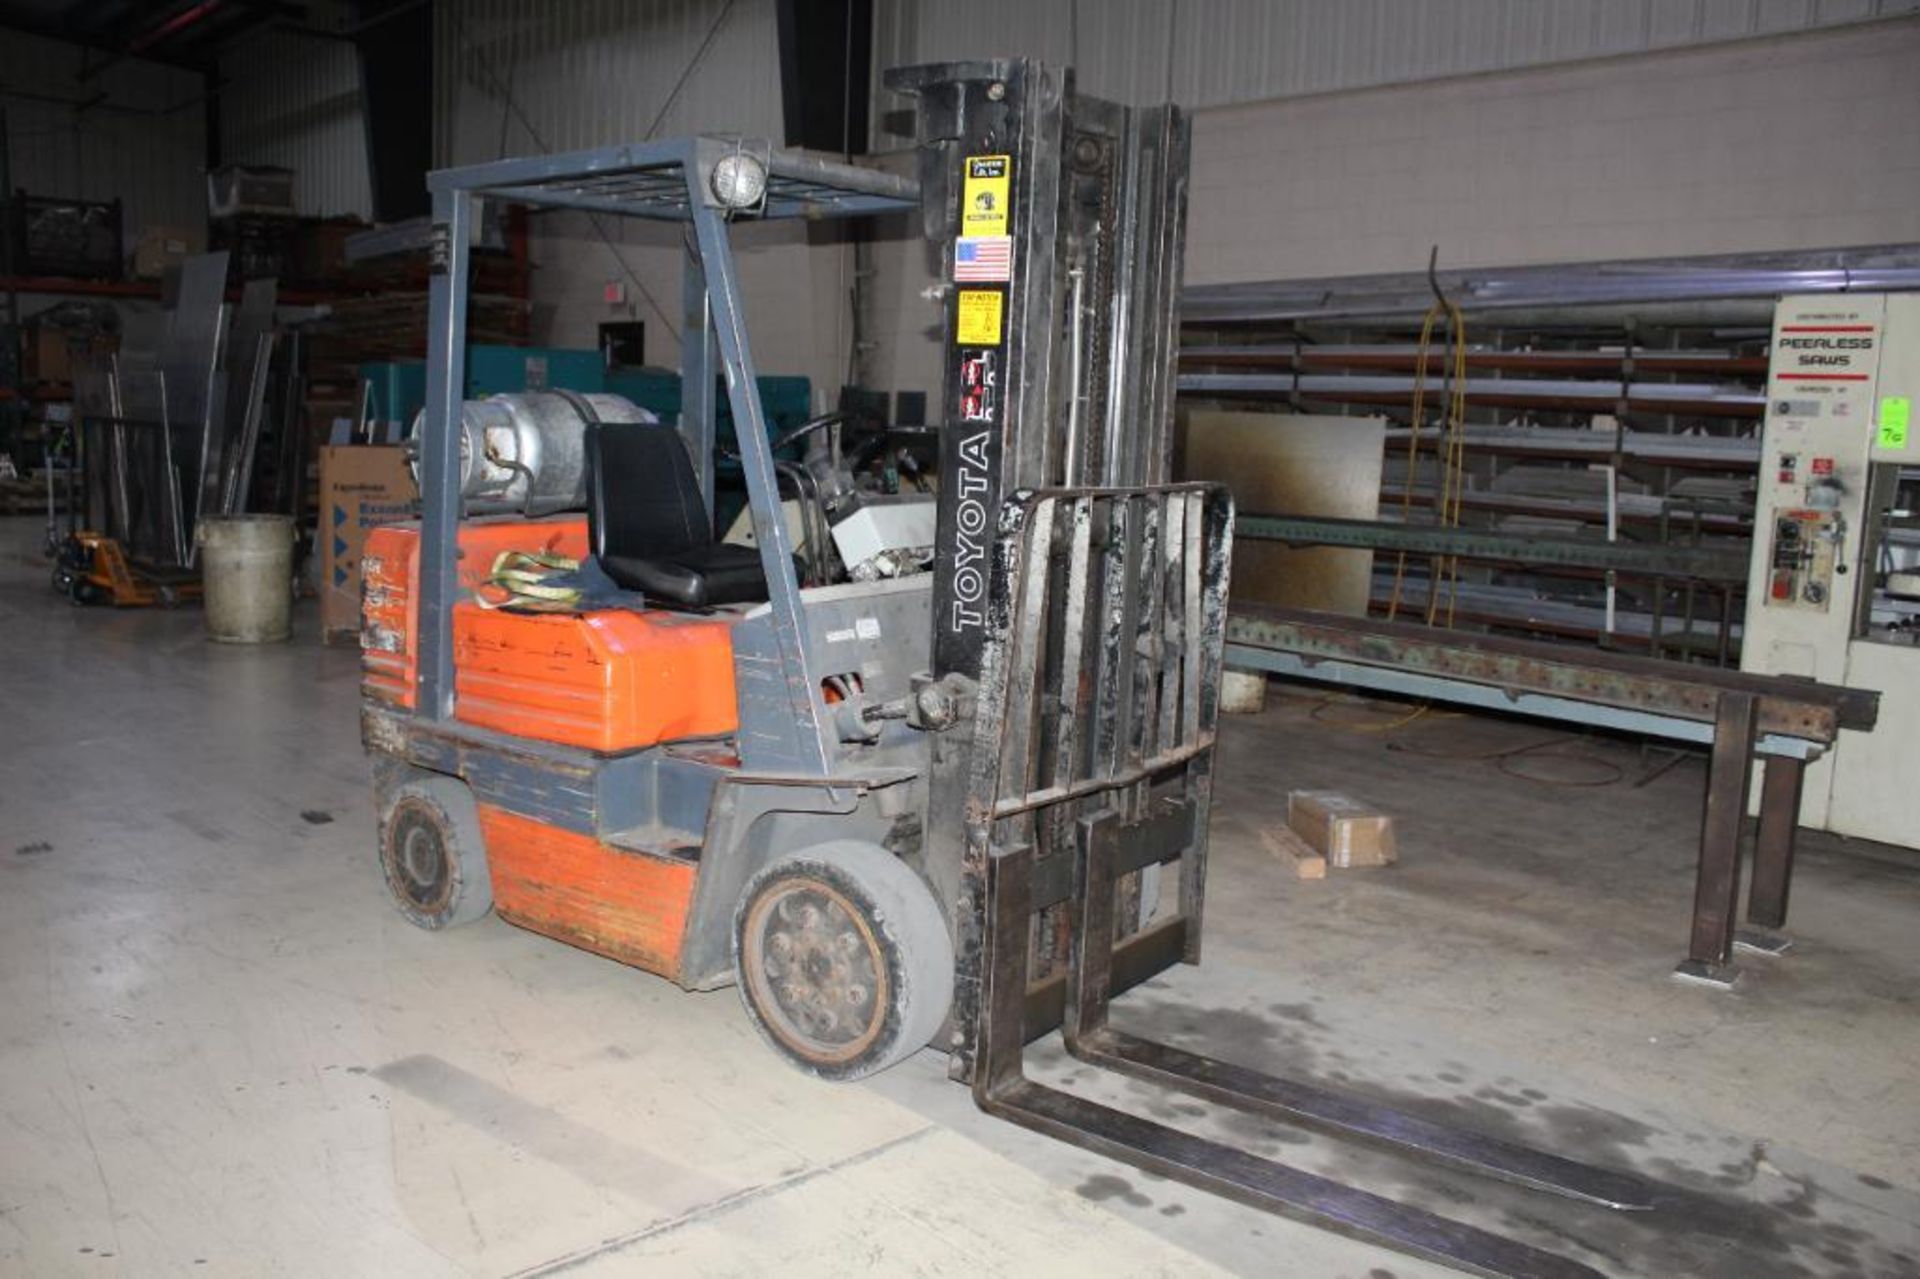 Toyota 4000LB. Propane Forklift Triple Stage Mast Model 5FG025 With 4'Forks - Delayed Removal